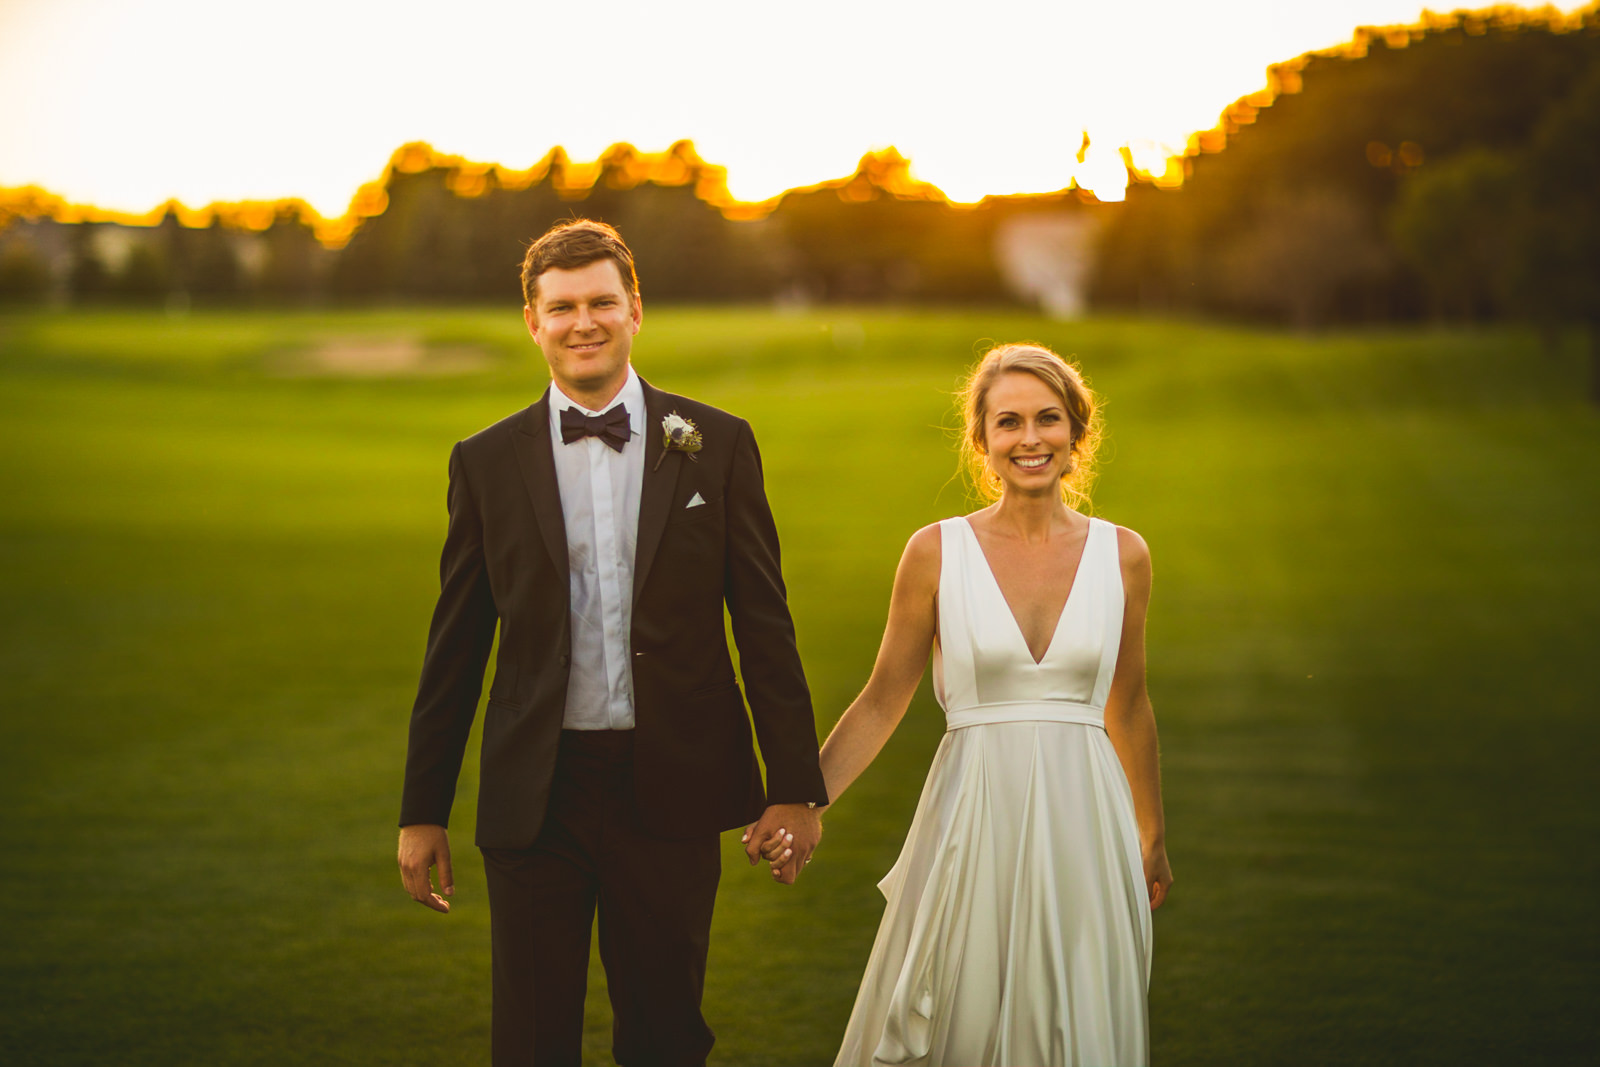 60 sunset bridal session - Stephanie + Zack // Conway Farms Chicago Wedding Photographers